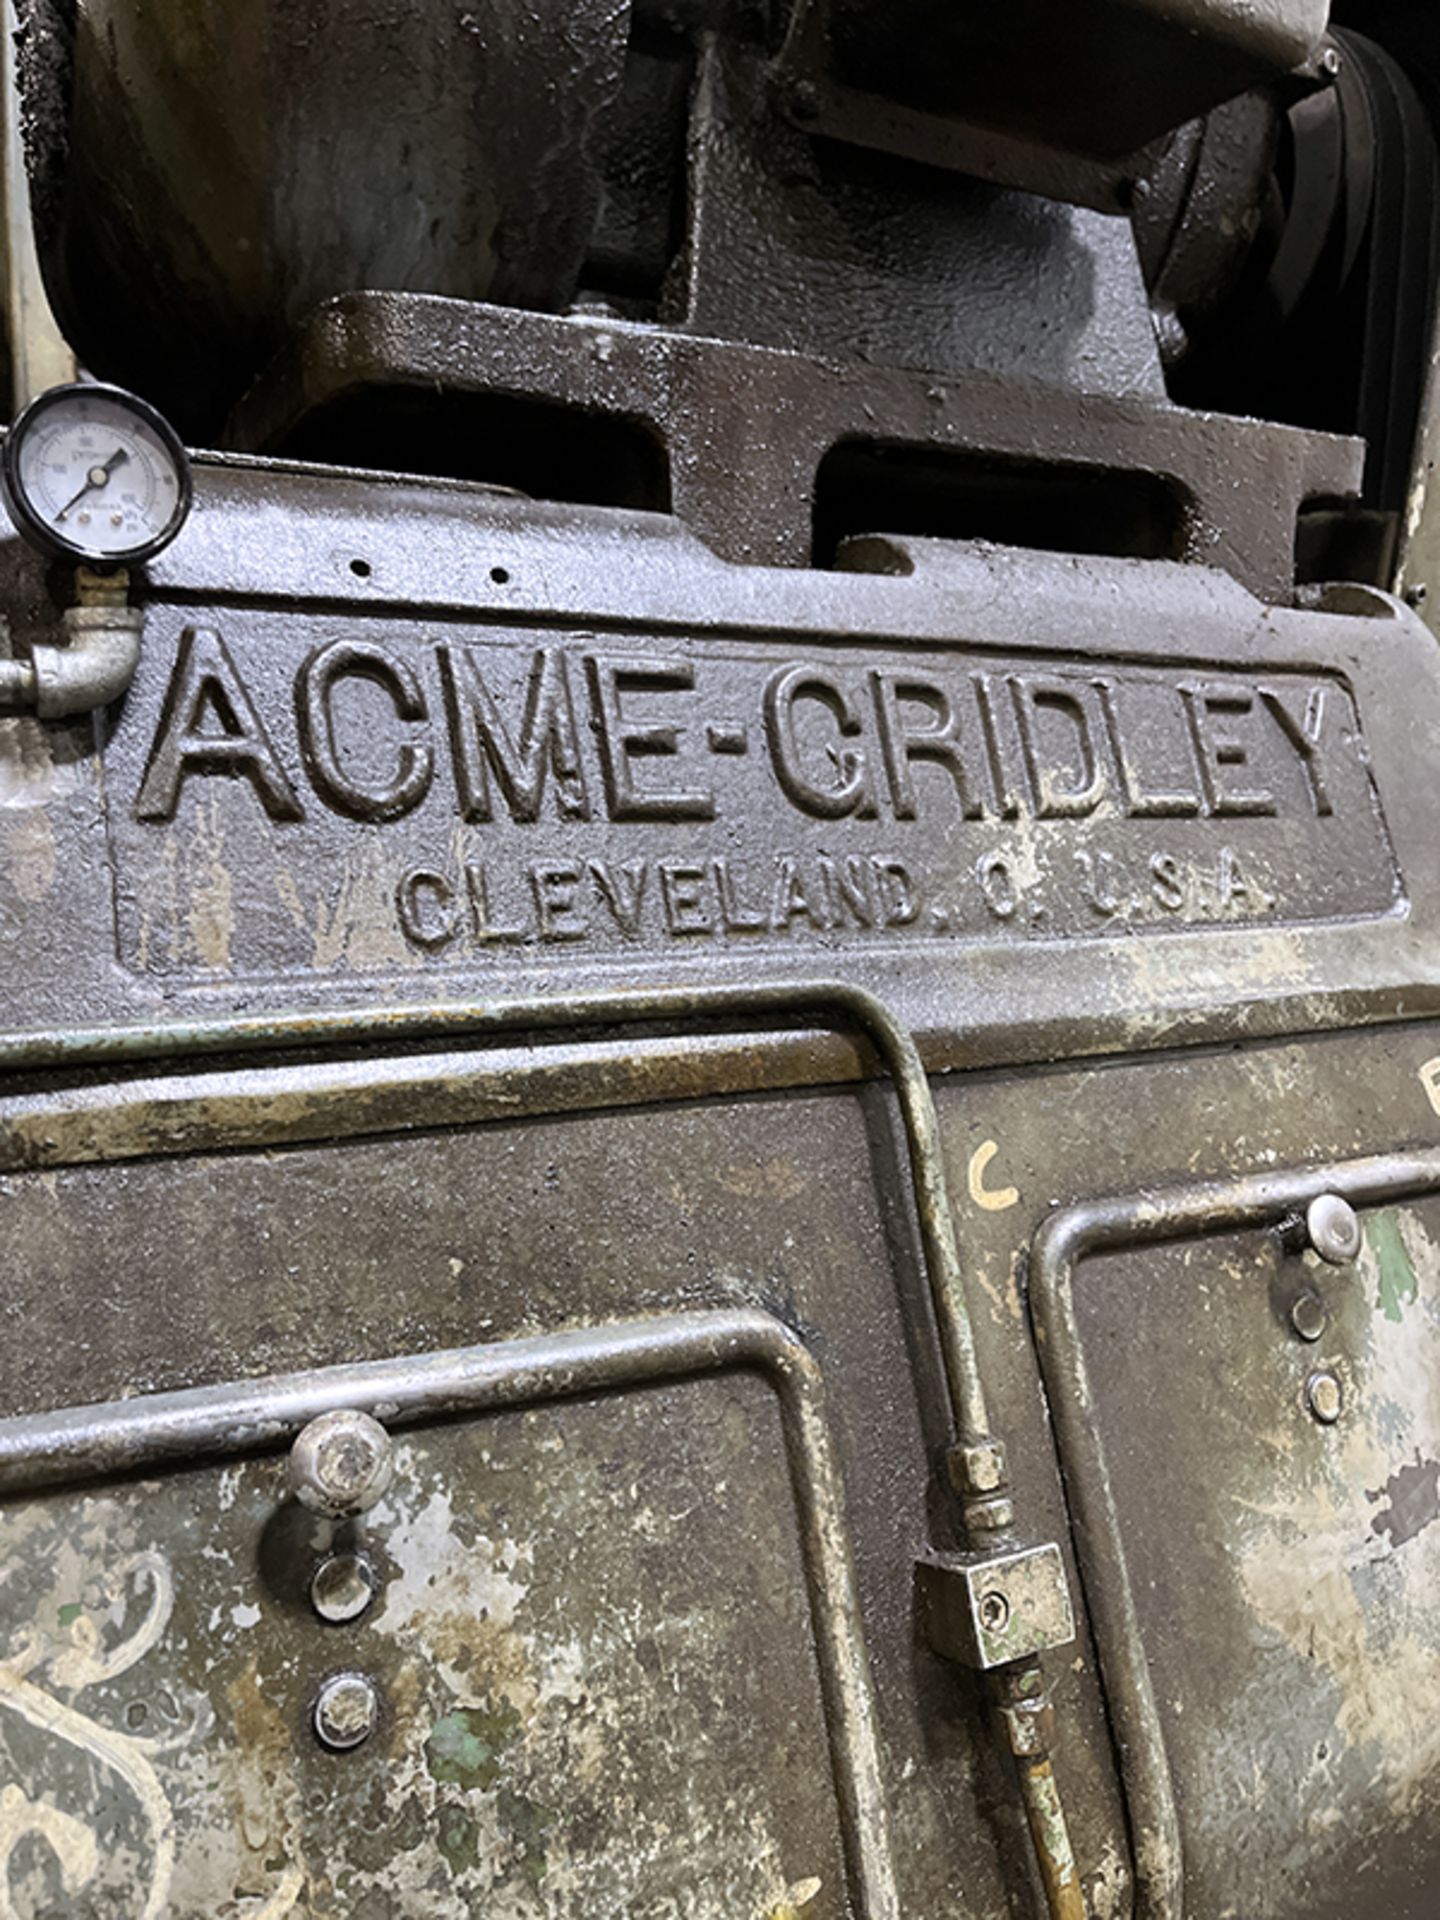 1 5/8" Acme Gridley RB6 Automatic Screw Machine - Image 13 of 14